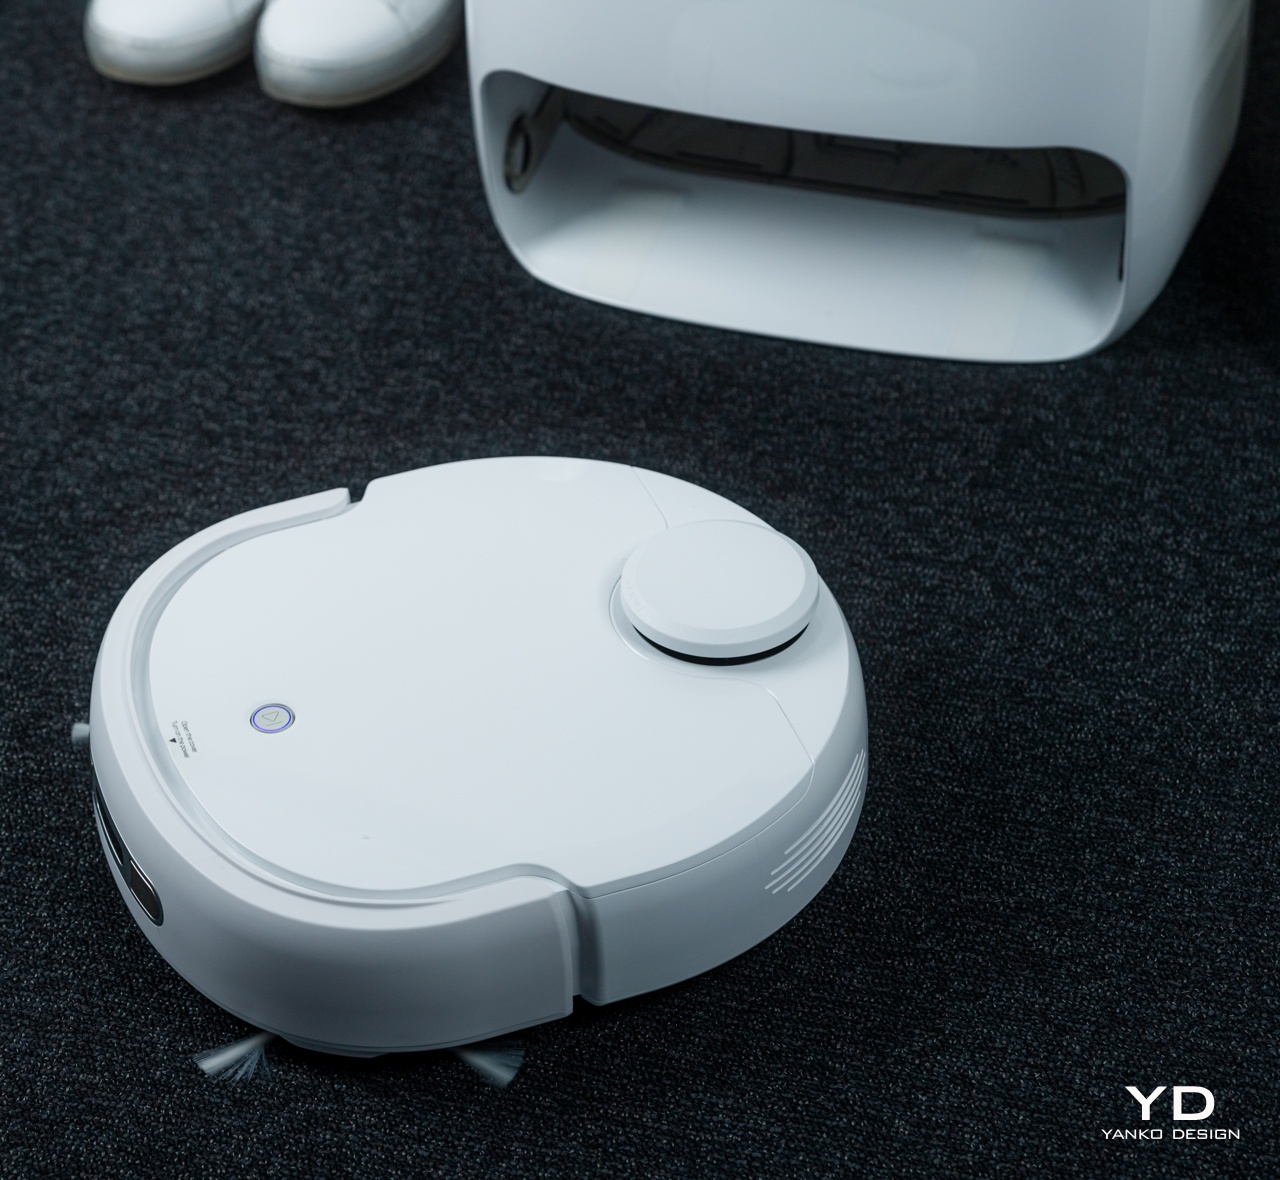 Narwal Brings Its Robot Vacuum With Self-cleaning Mop To The U.S. - SHOUTS